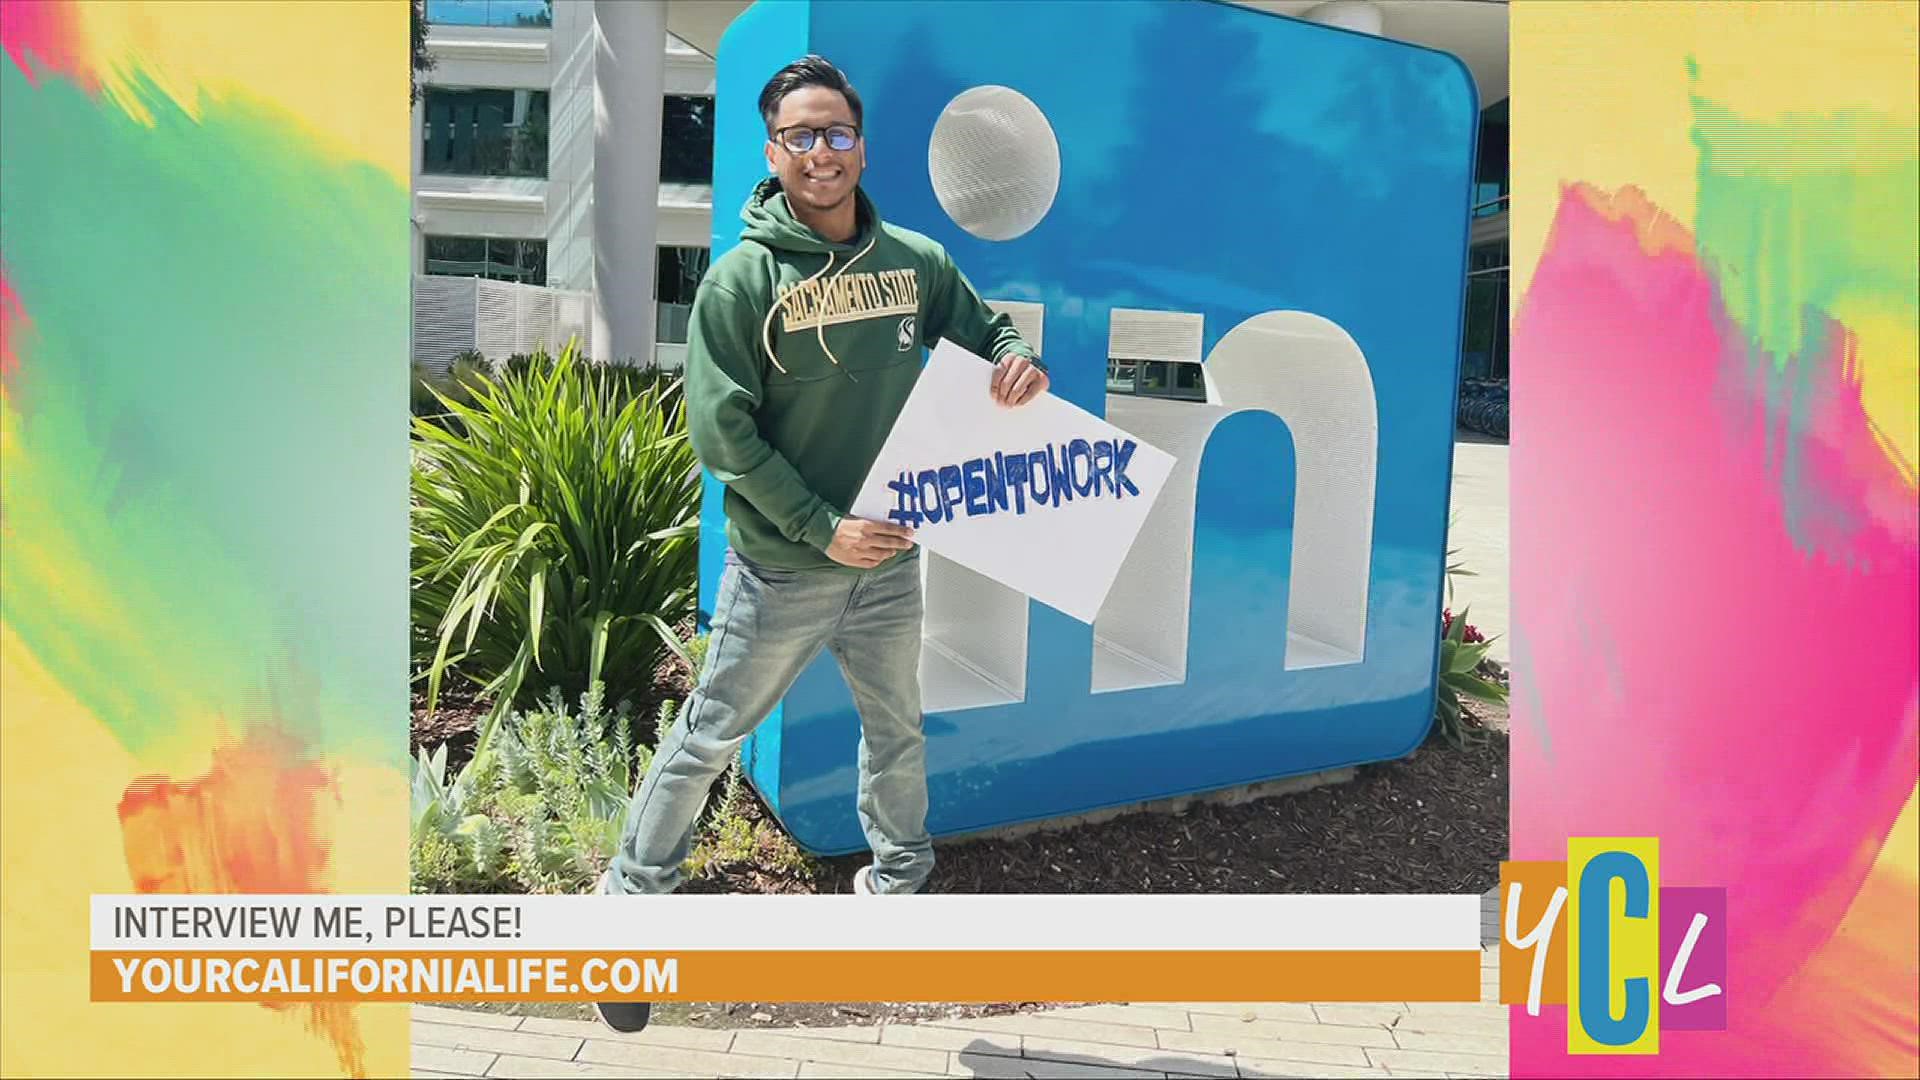 A first generation Latino college student at Sac State is looking for work as graduation approaches. He shares how he's getting his name out there in a viral way.